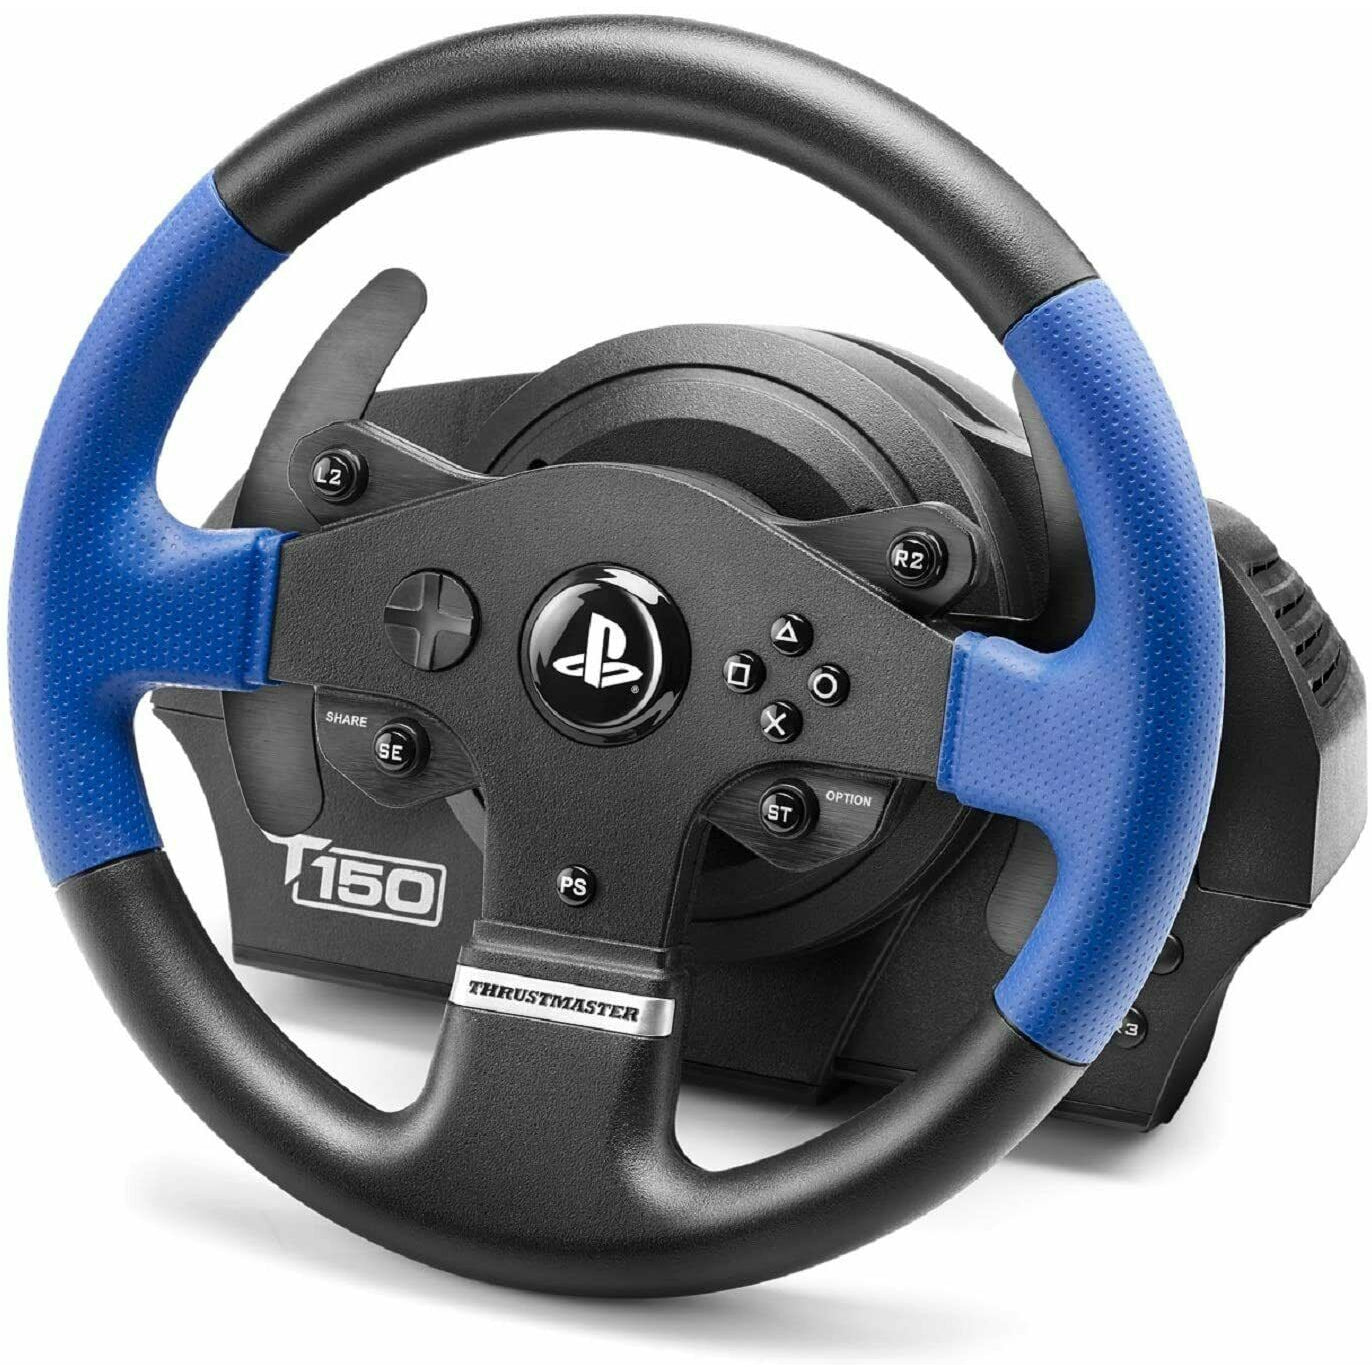 Thrustmaster T150 Force Feedback (PS4 / PS3 / PC) Racing Simulator Wheel Pedals